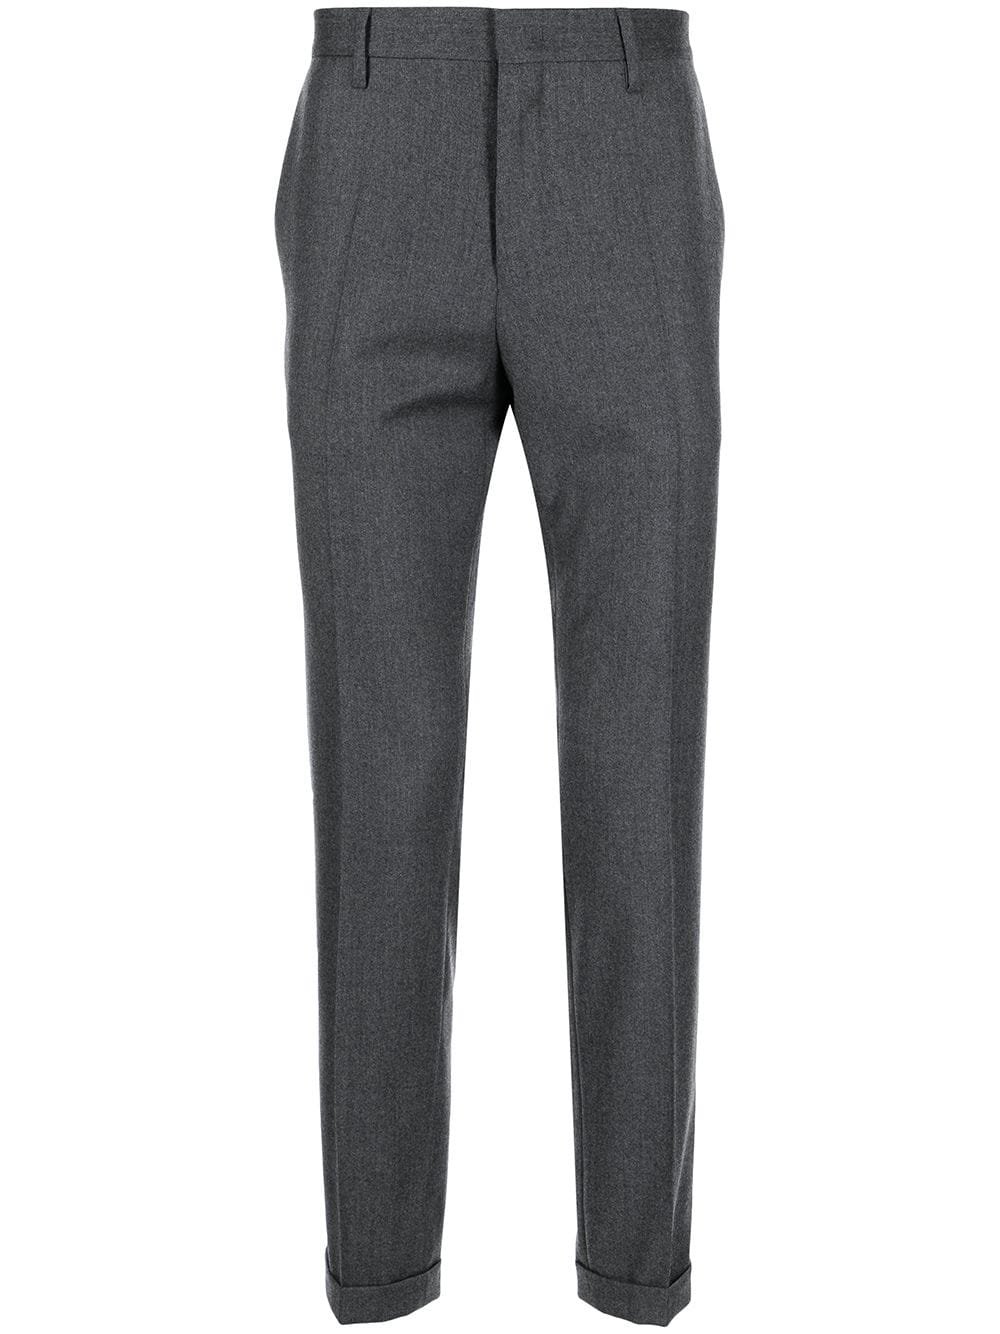 Paul Smith pressed-crease wool-blend tailored trousers - Grey von Paul Smith